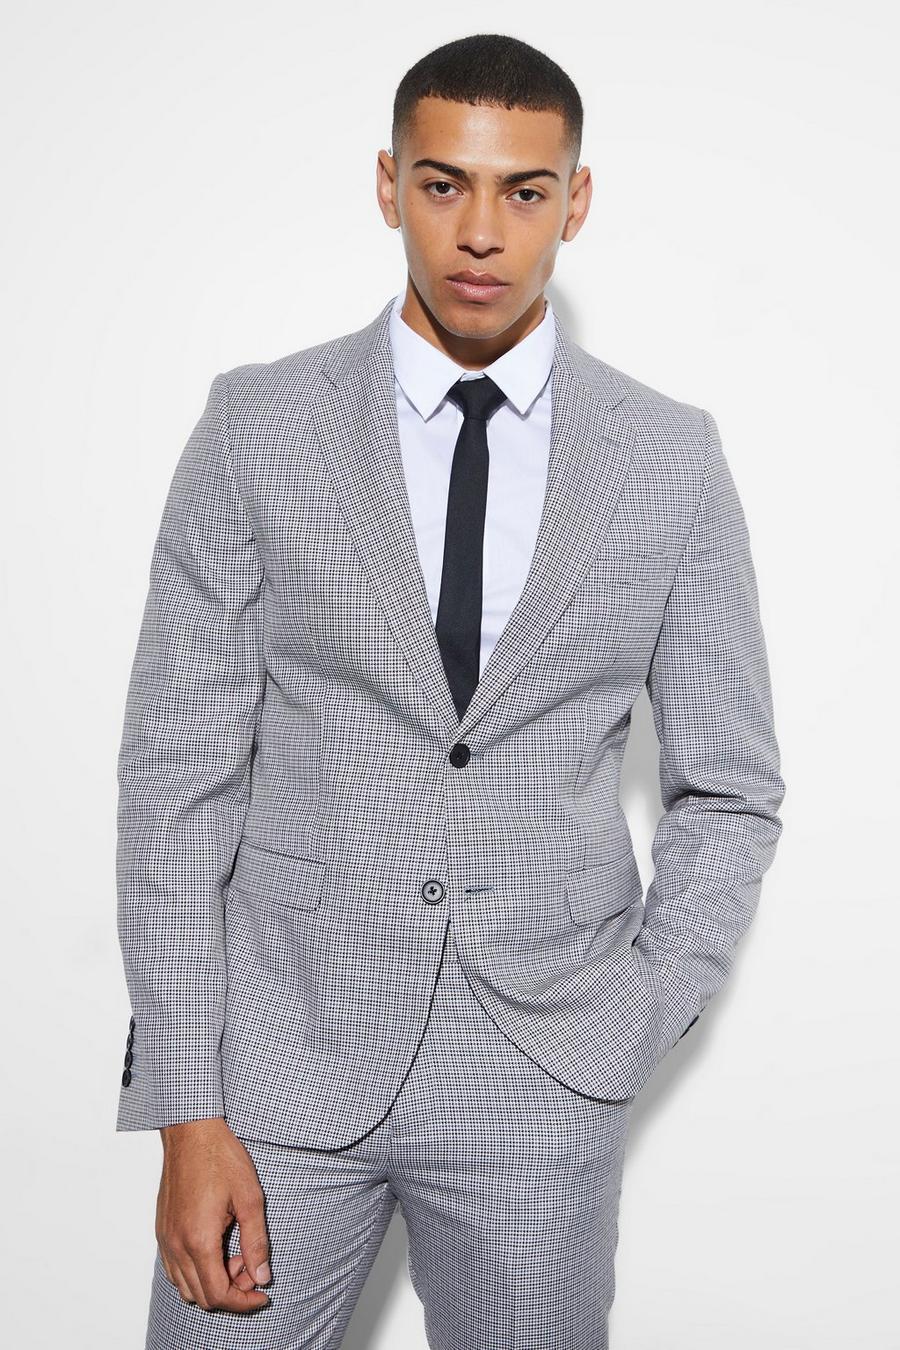 Navy Slim Dogstooth Single Breasted Suit Jacket